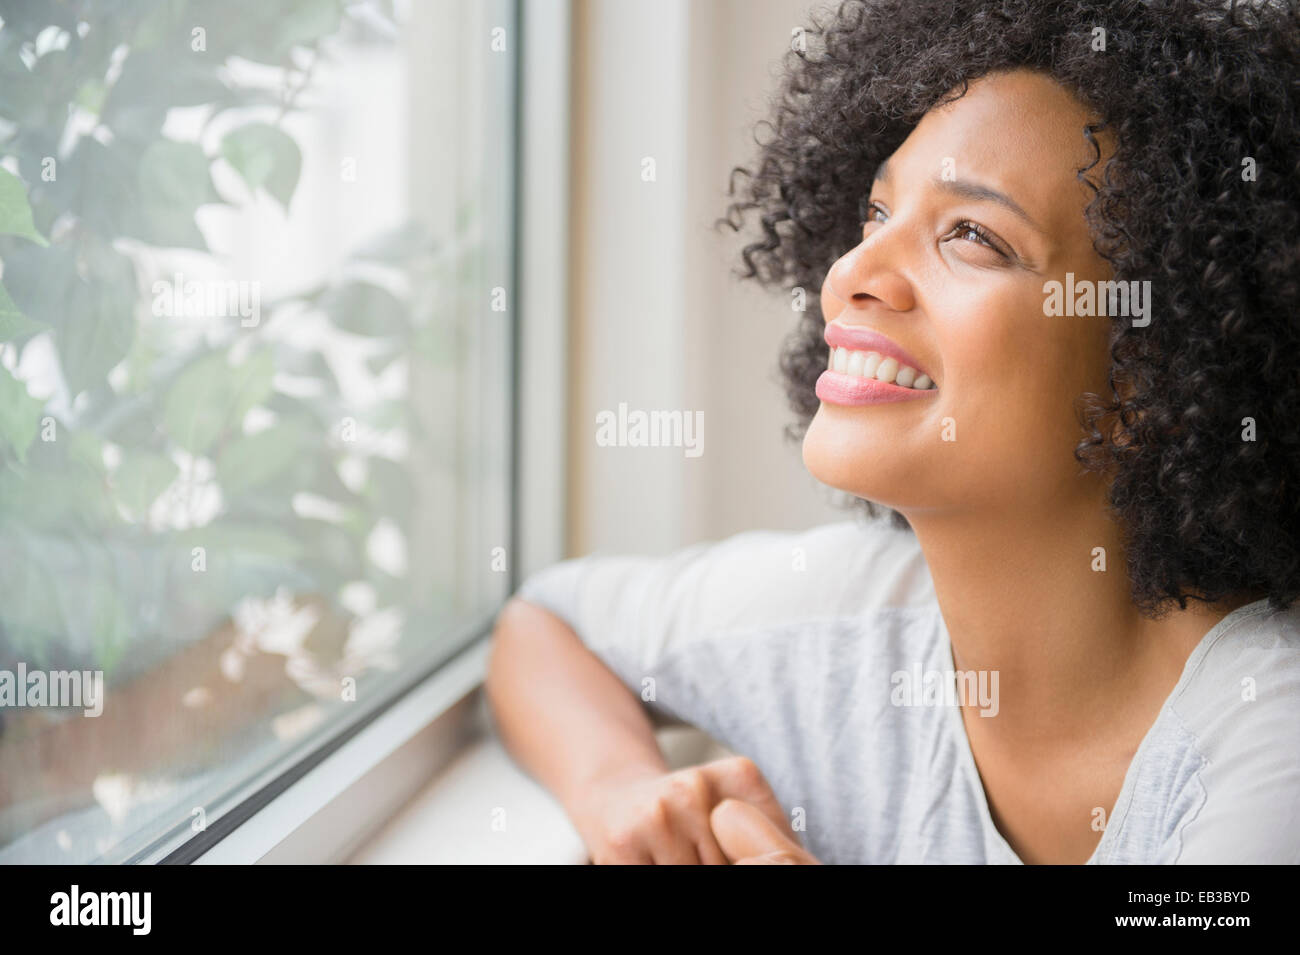 Smiling woman looking out window Stock Photo